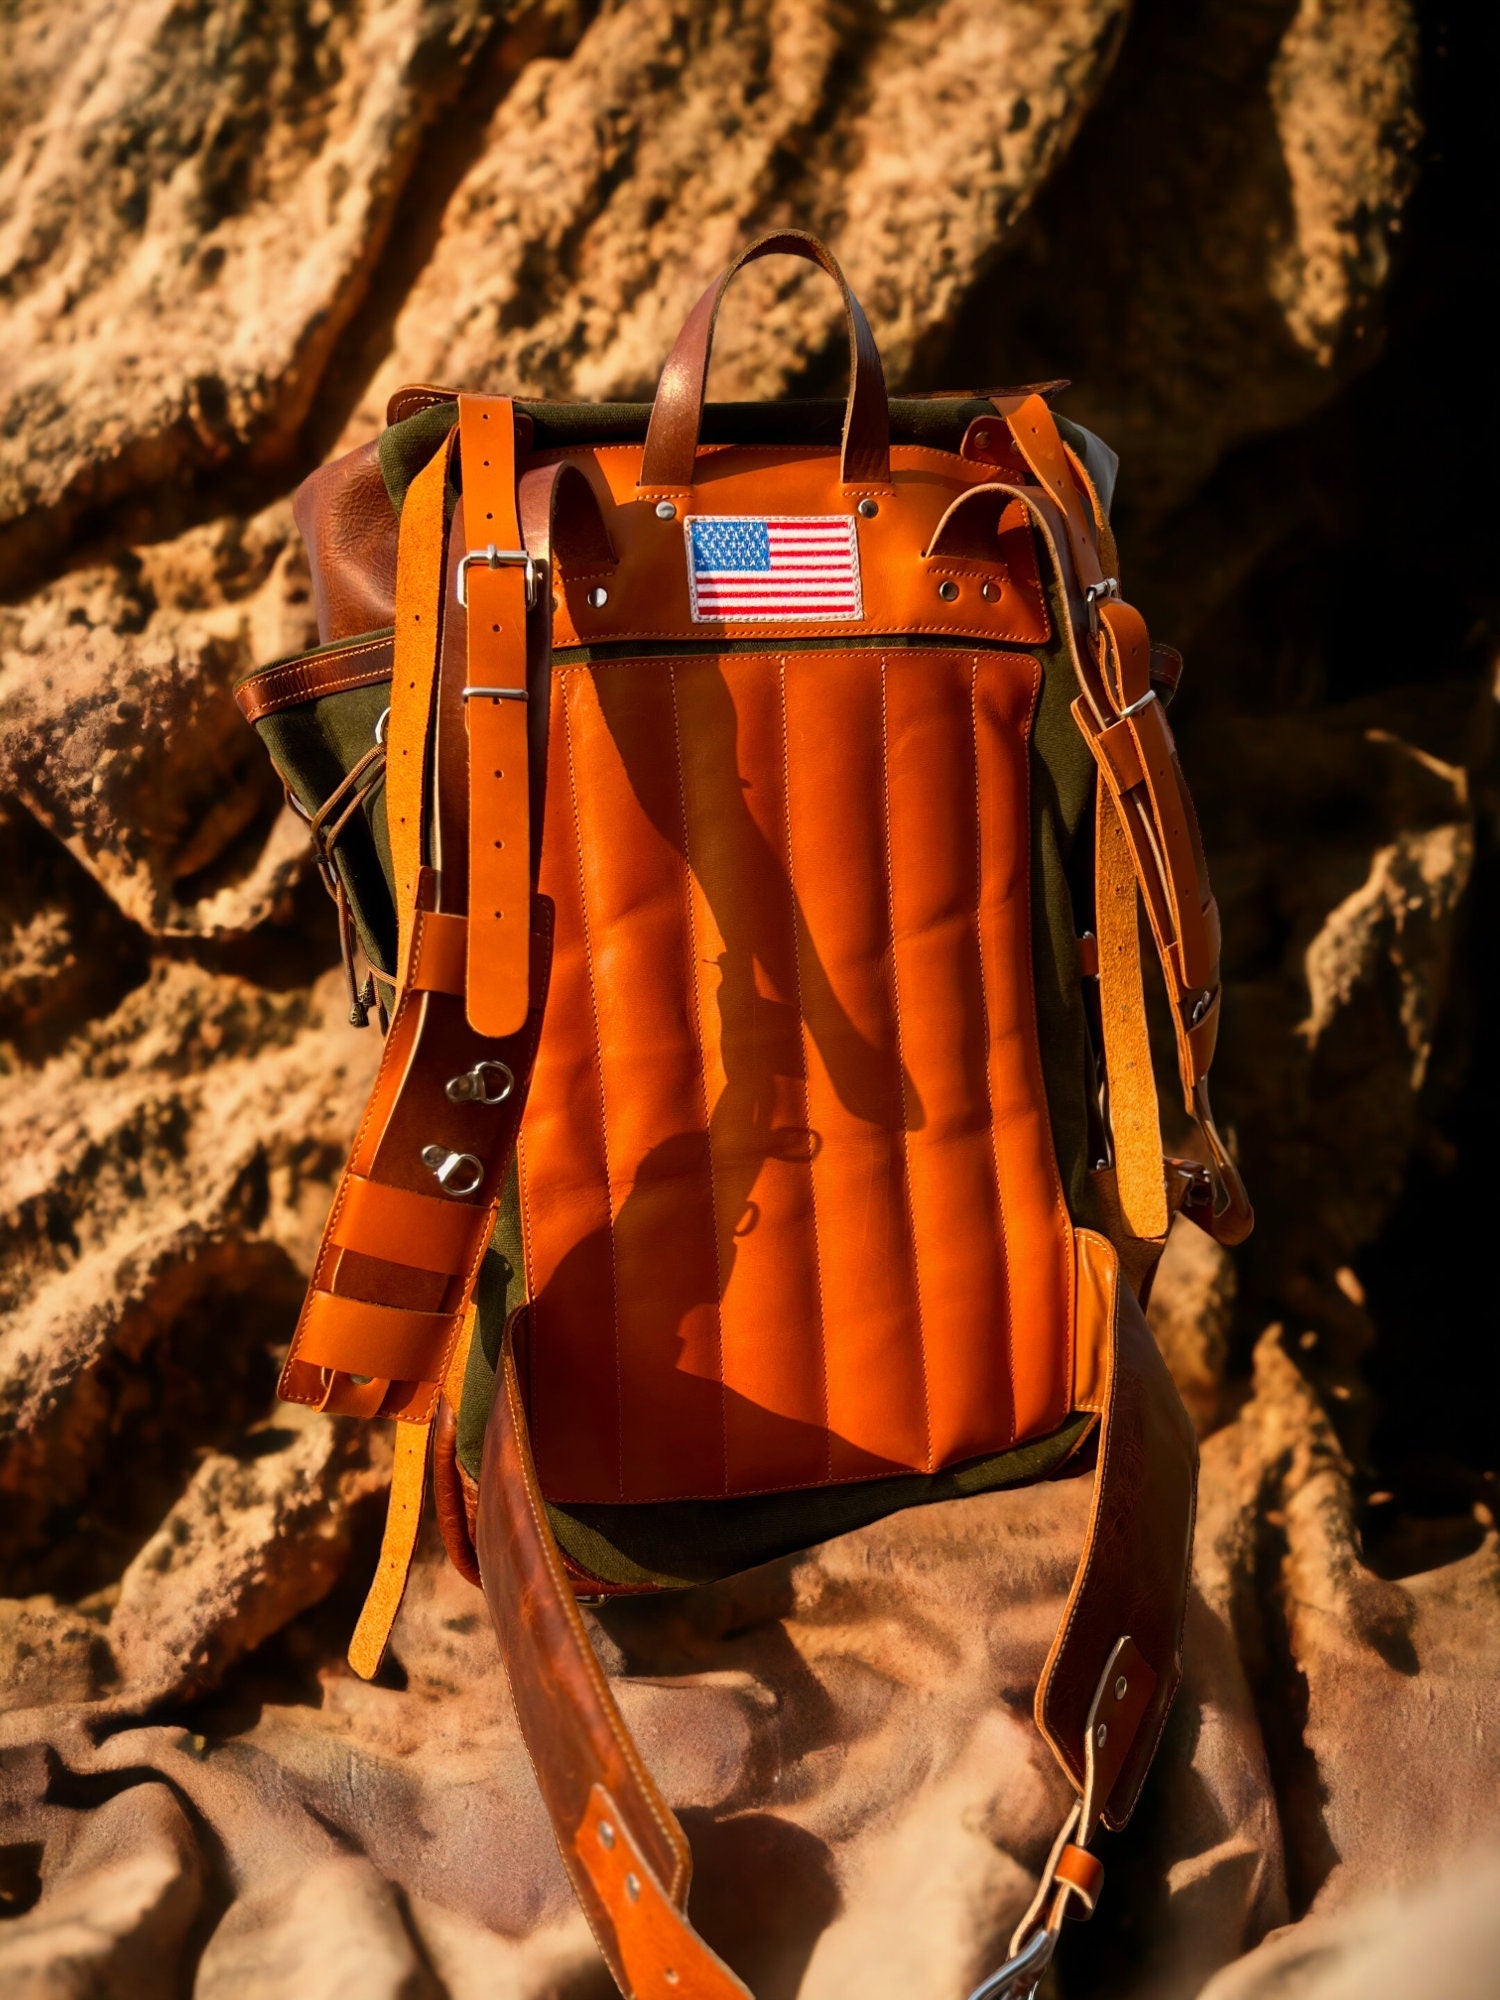 Handmade | Bushcraft Backpack | Canvas Leather Backpack | 50 L  | Daily Use | Bushcraft, Travel, Camping, Hunting, Fishing, Sports bag  99percenthandmade   